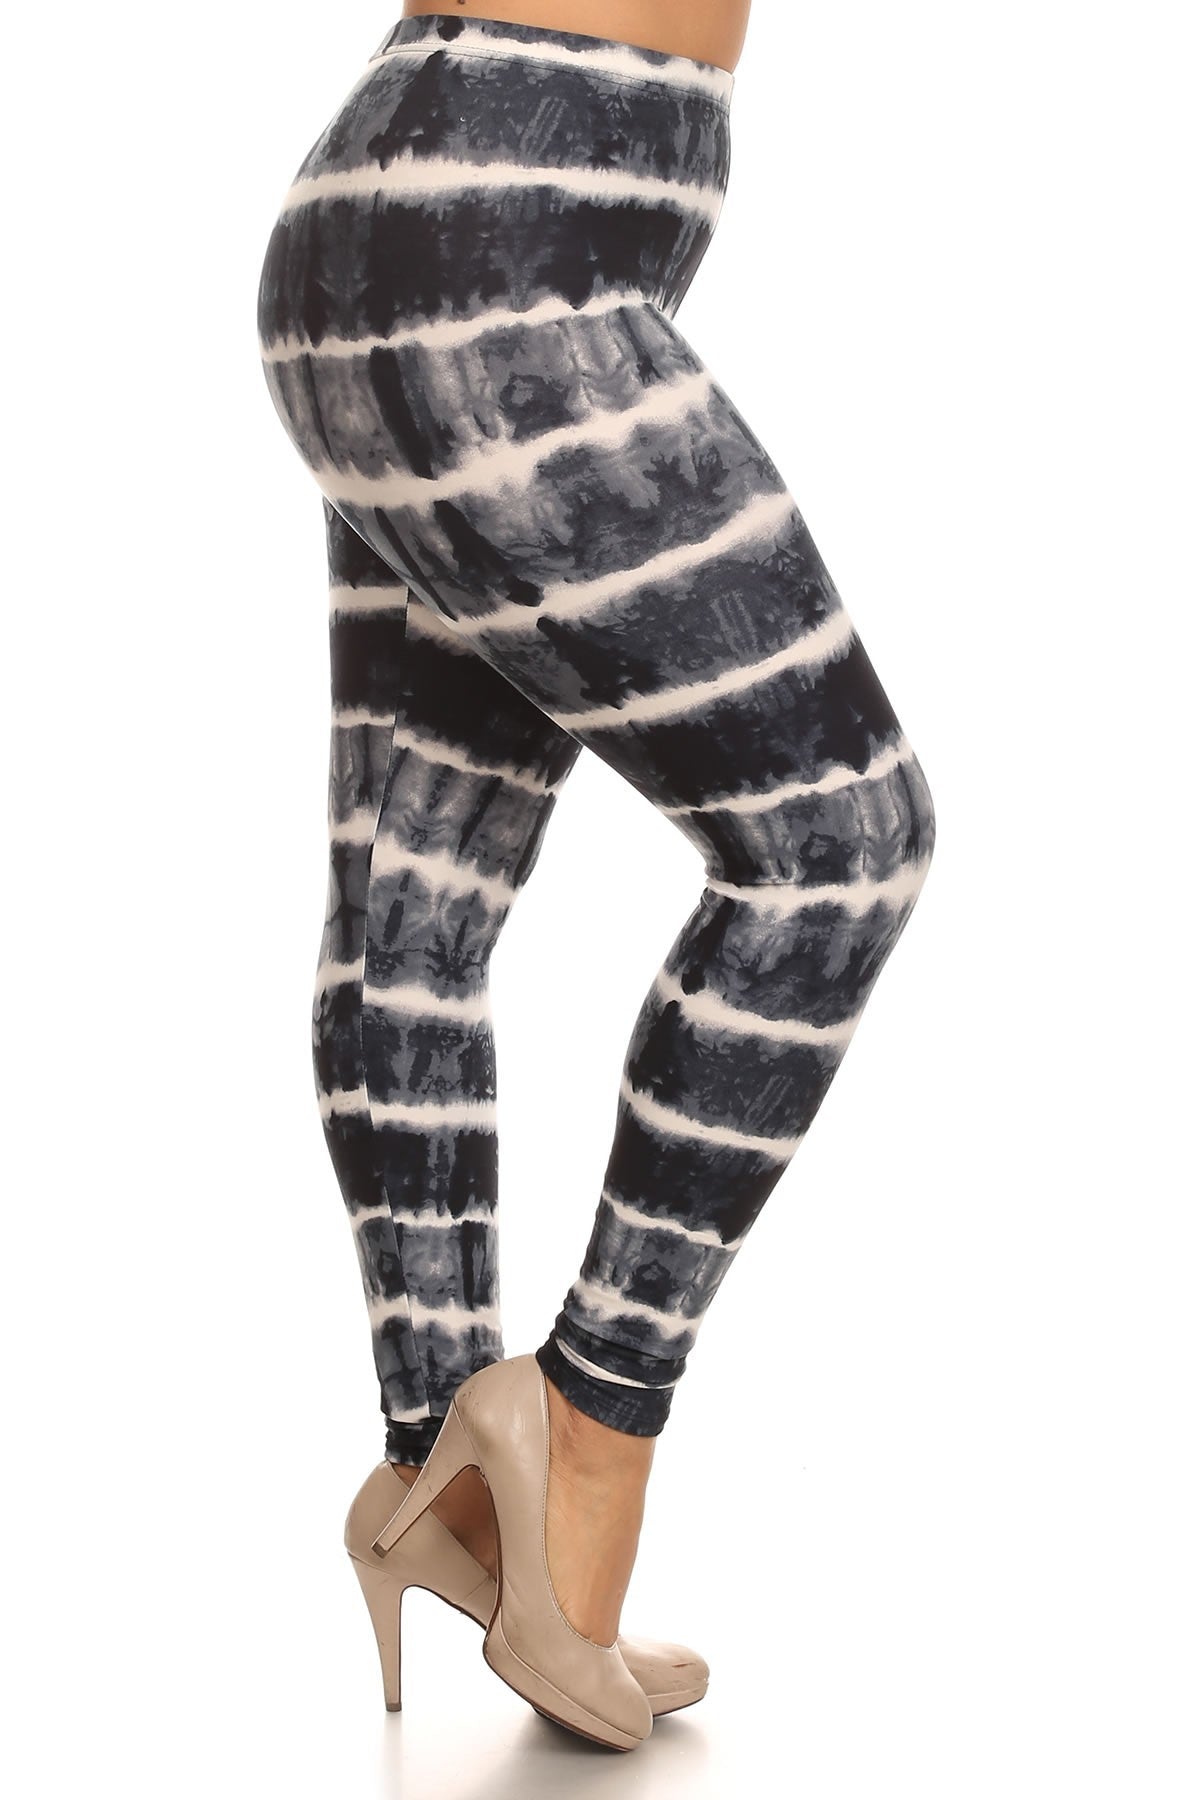 Plus Size Tie Dye Print, Full Length Leggings In A Fitted Style With A Banded High Waist - Fashion Quality Boutik